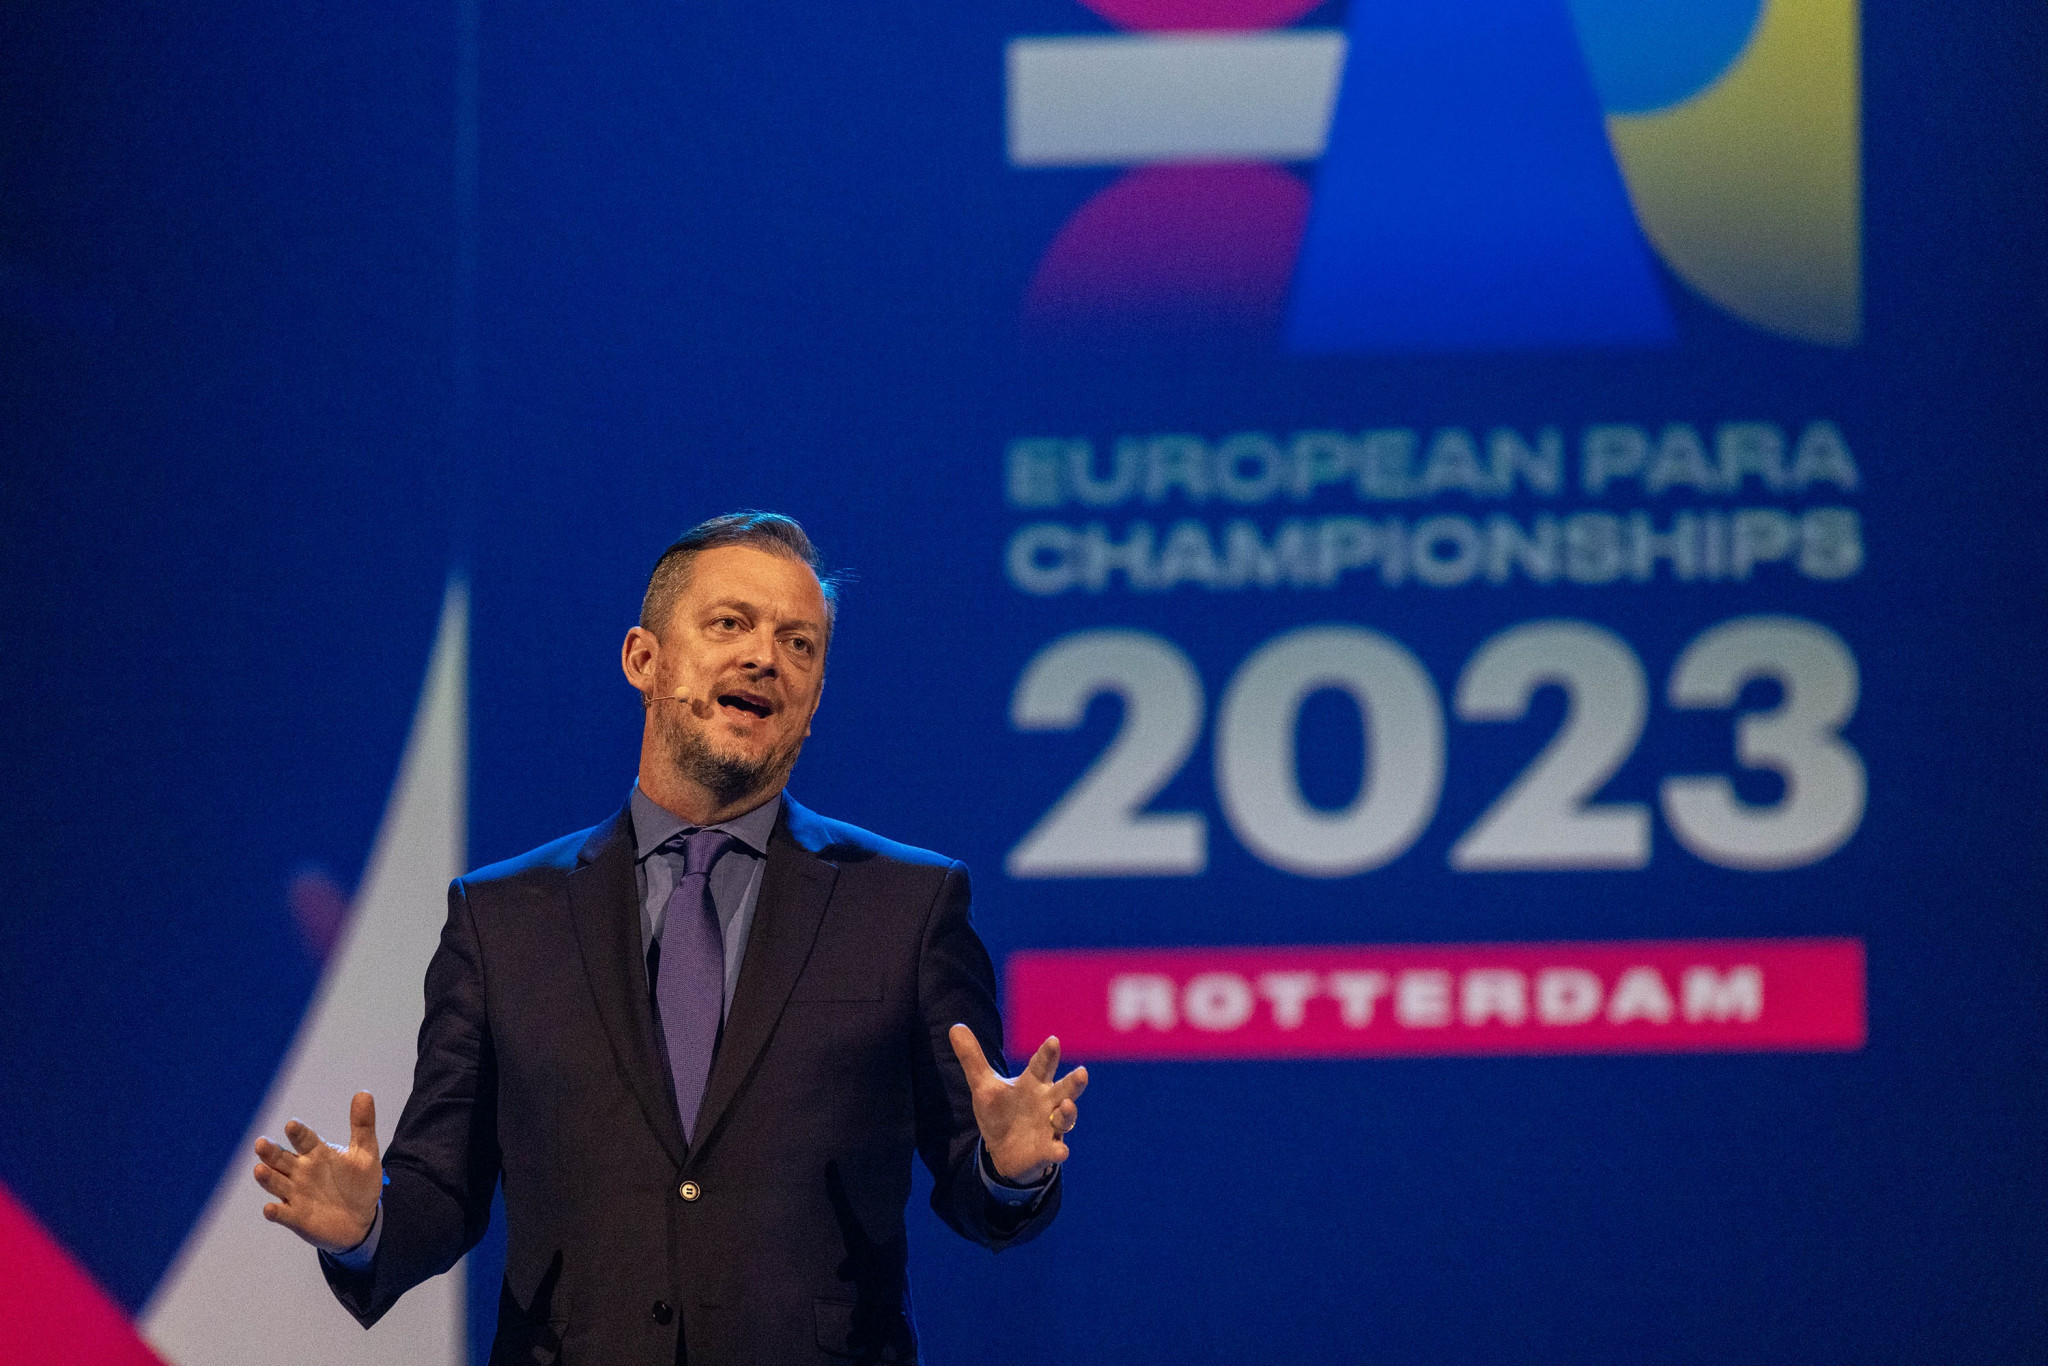 IPC President Andrew Parsons said Russian athletes in athletics, swimming and shooting sport will still have chances to qualifiy for Paris 2024 if a decision is made to allow them to return to competition ©EPC